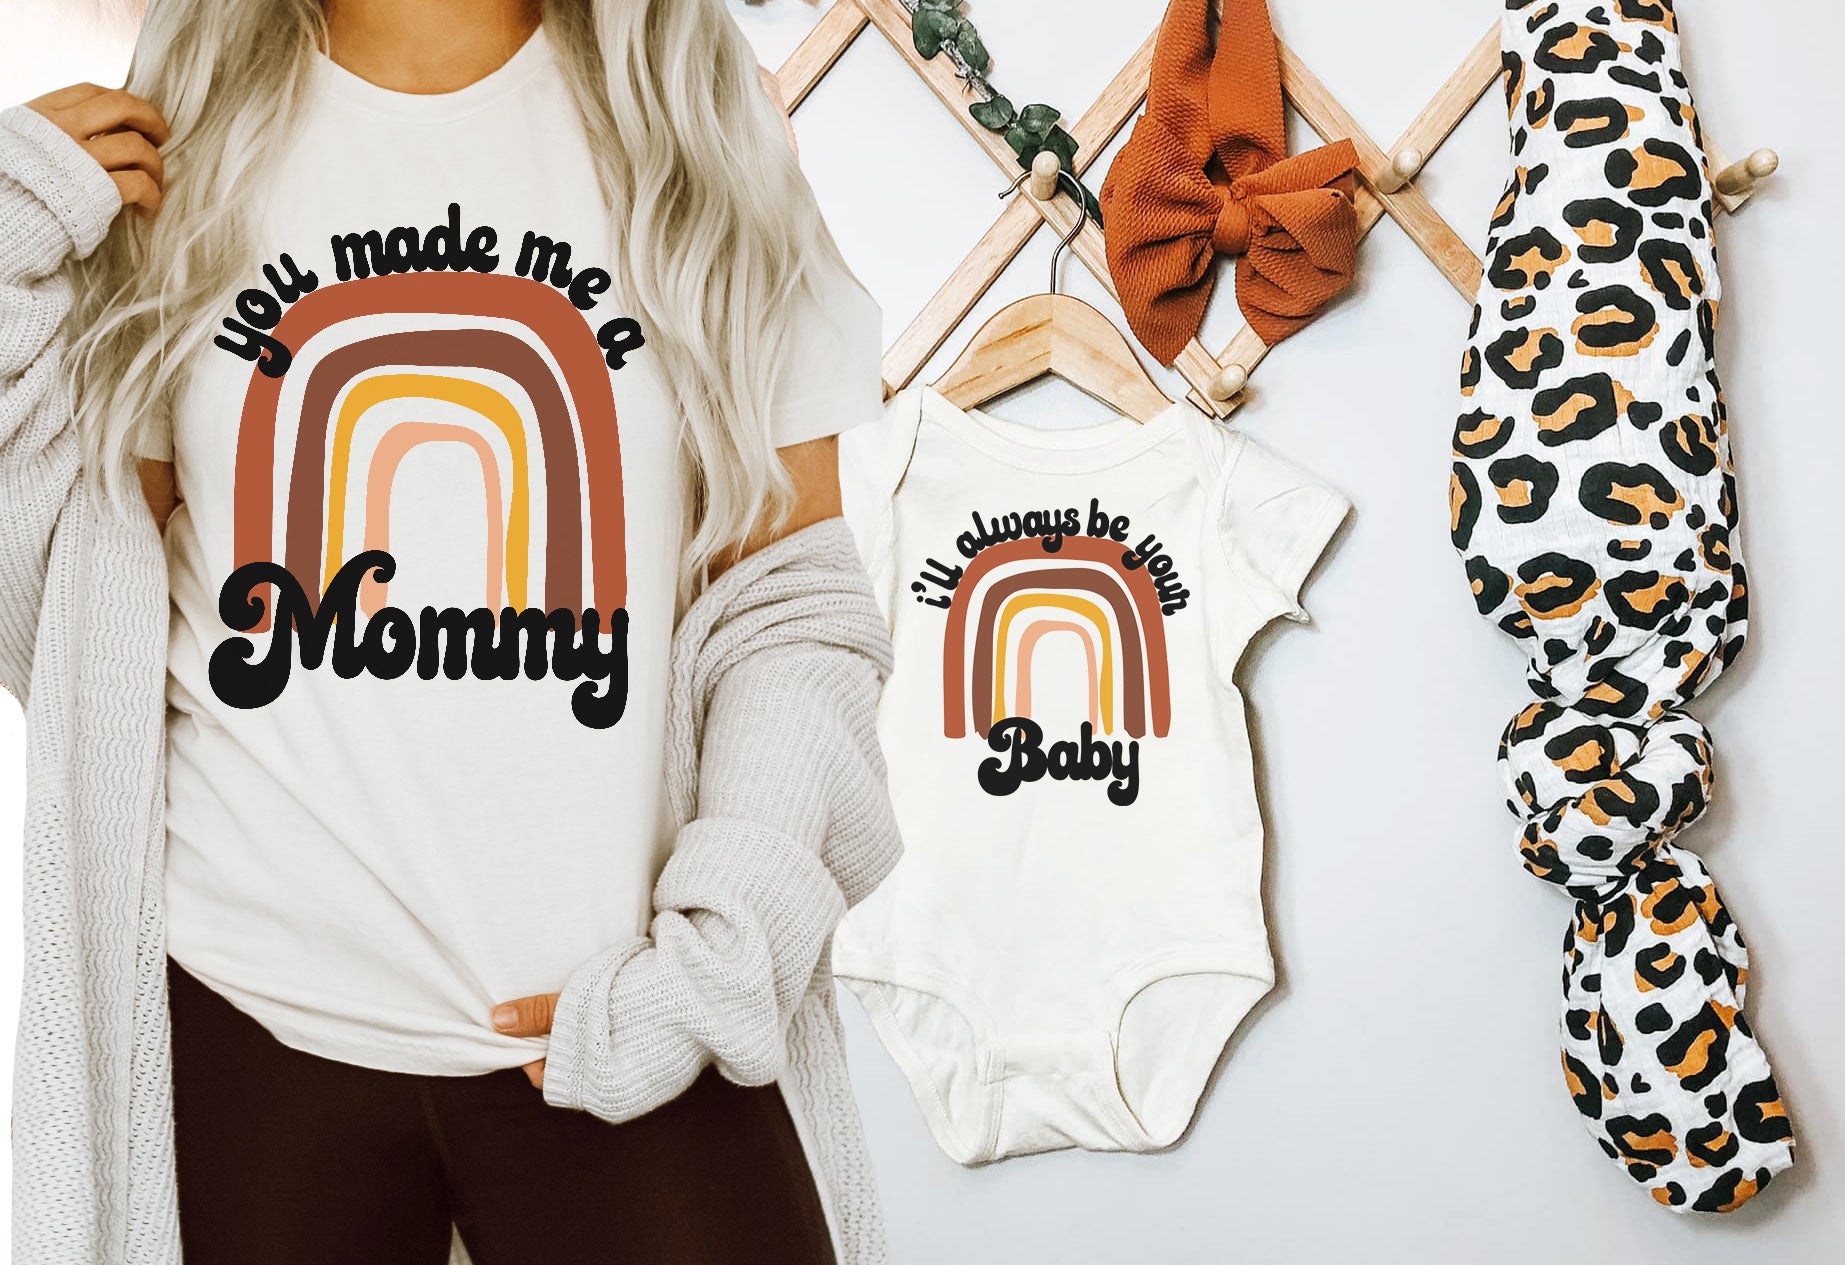 « YOU MADE ME A MOMMY / I'LL ALWAYS BE YOUR BABY » MOMMY & ME